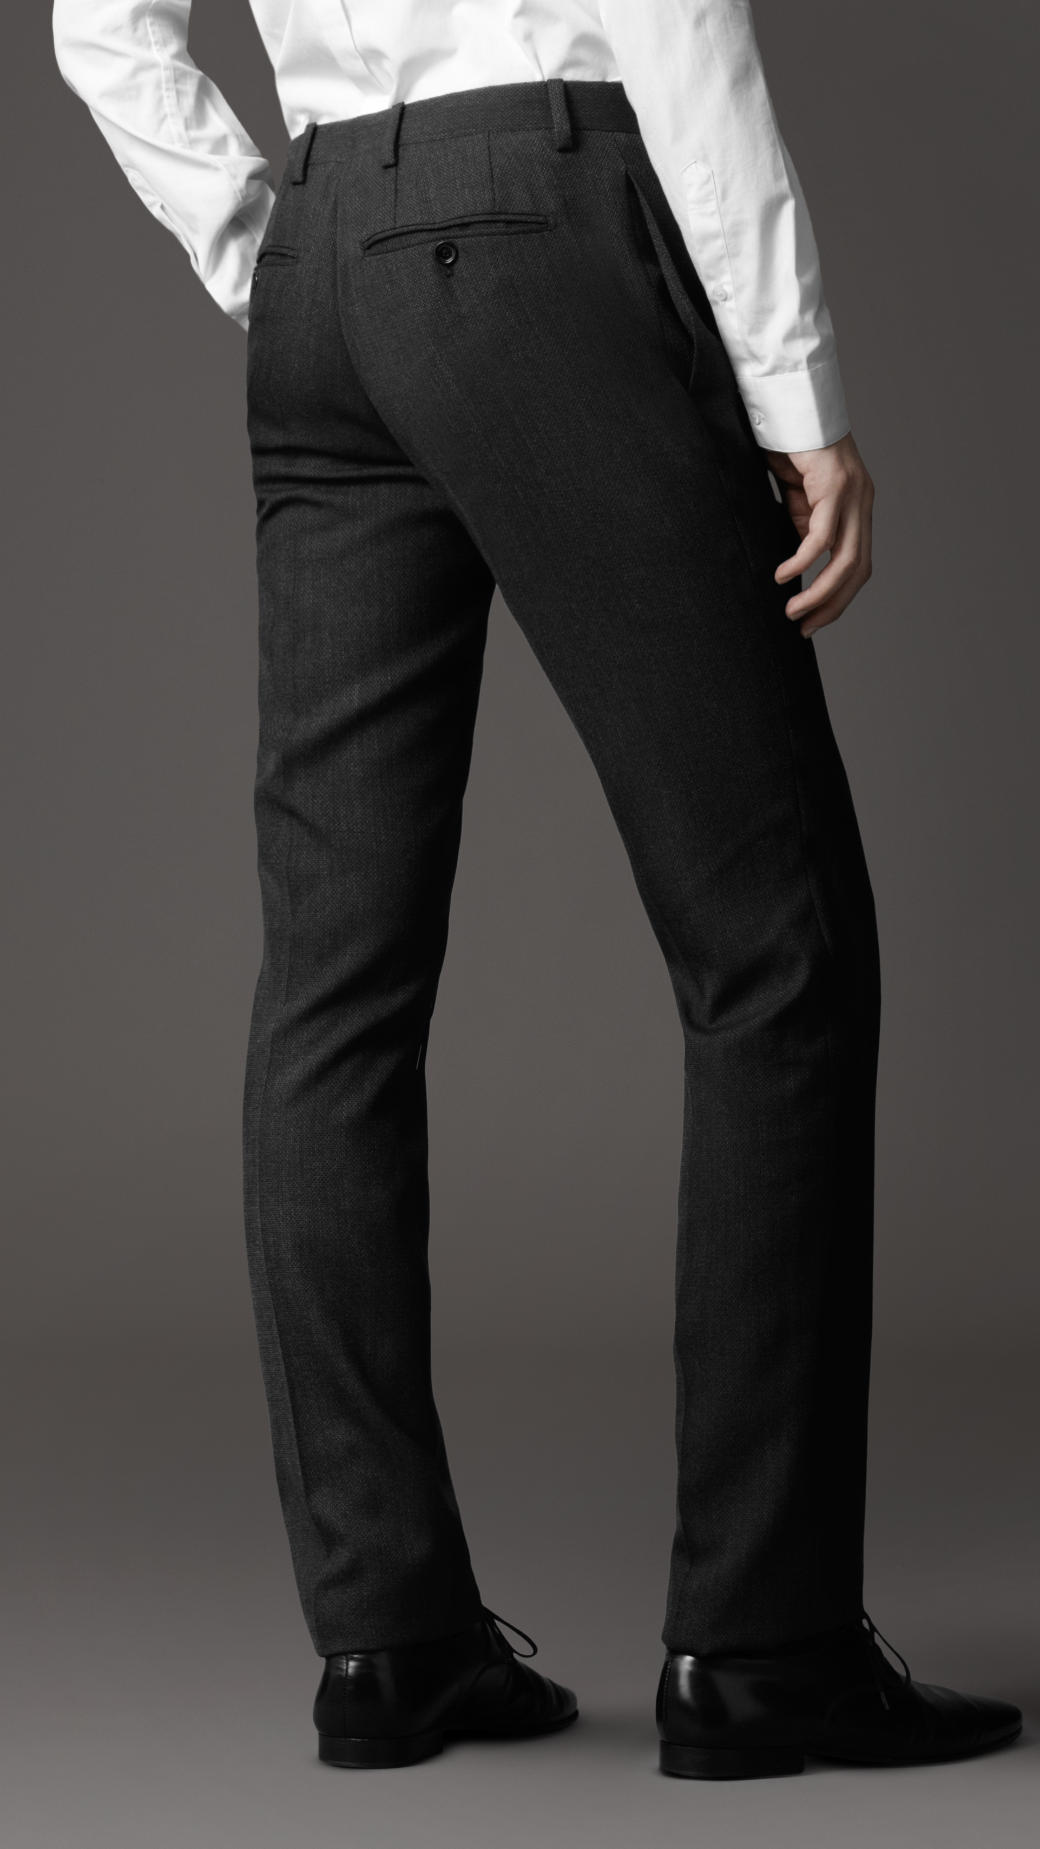 Lyst - Burberry Modern Fit Wool Trousers in Black for Men